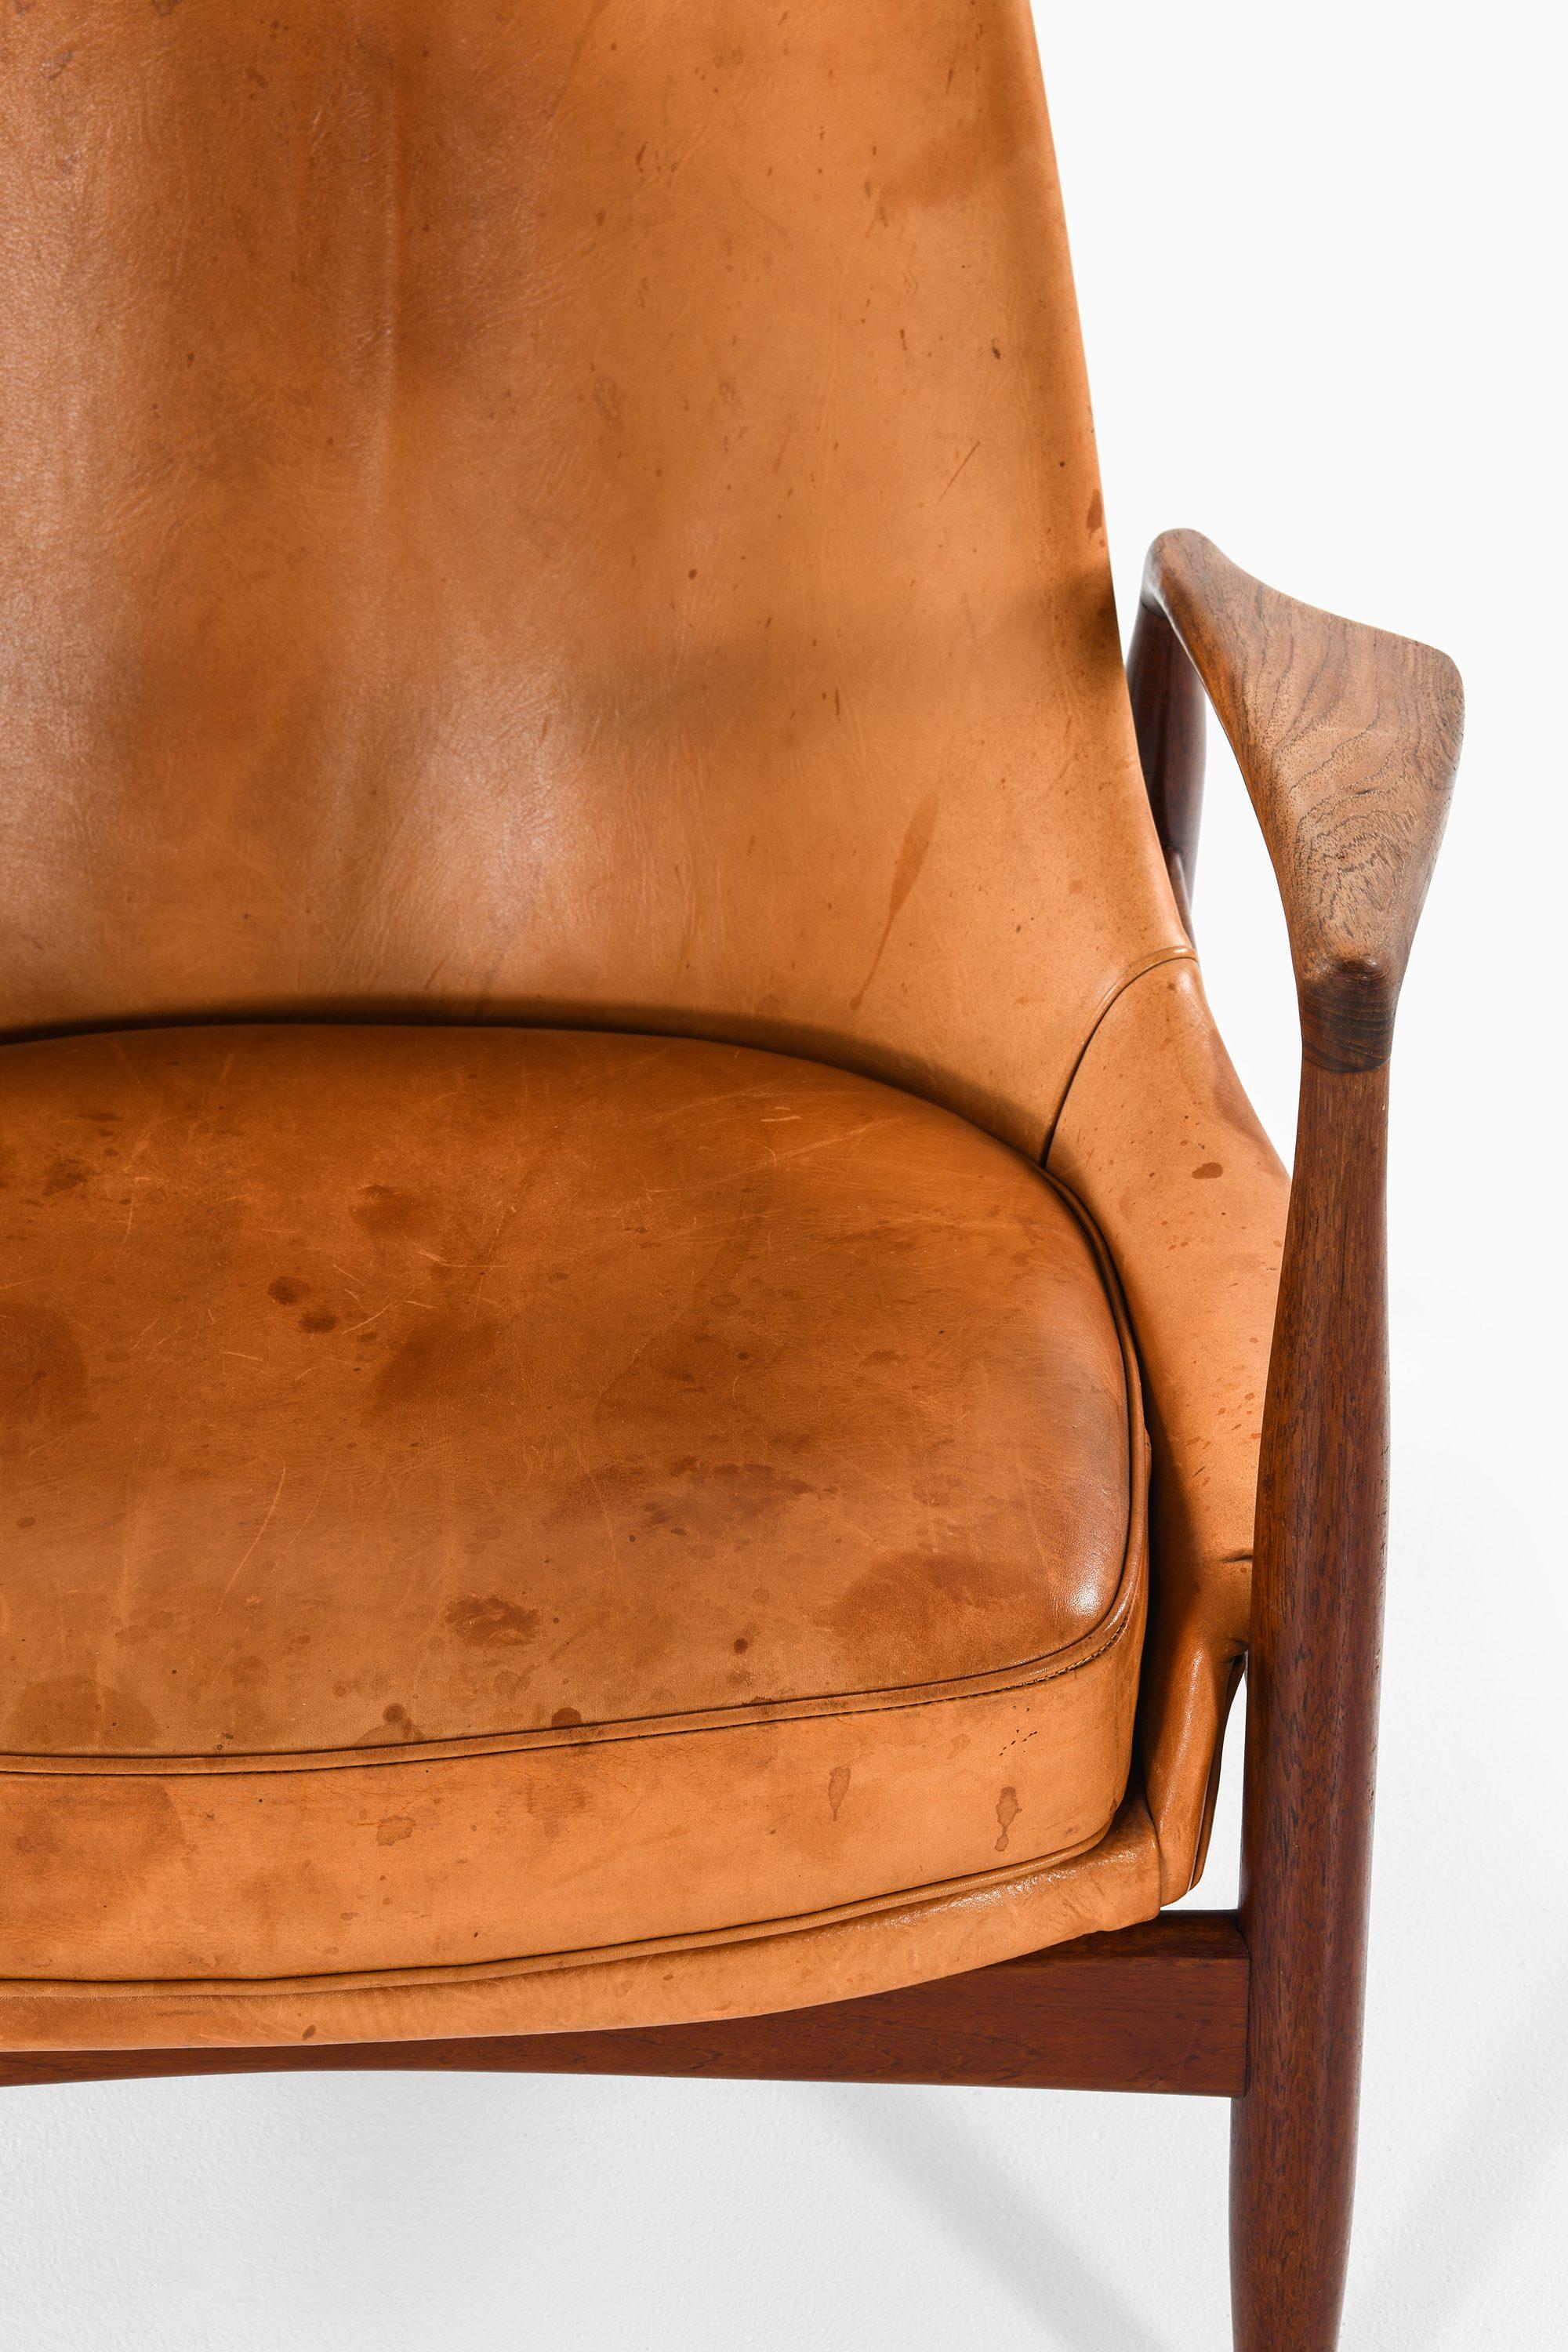 Pair of Easy Chairs in Teak and Leather by Ib Kofod-Larsen, 1950s For Sale 1